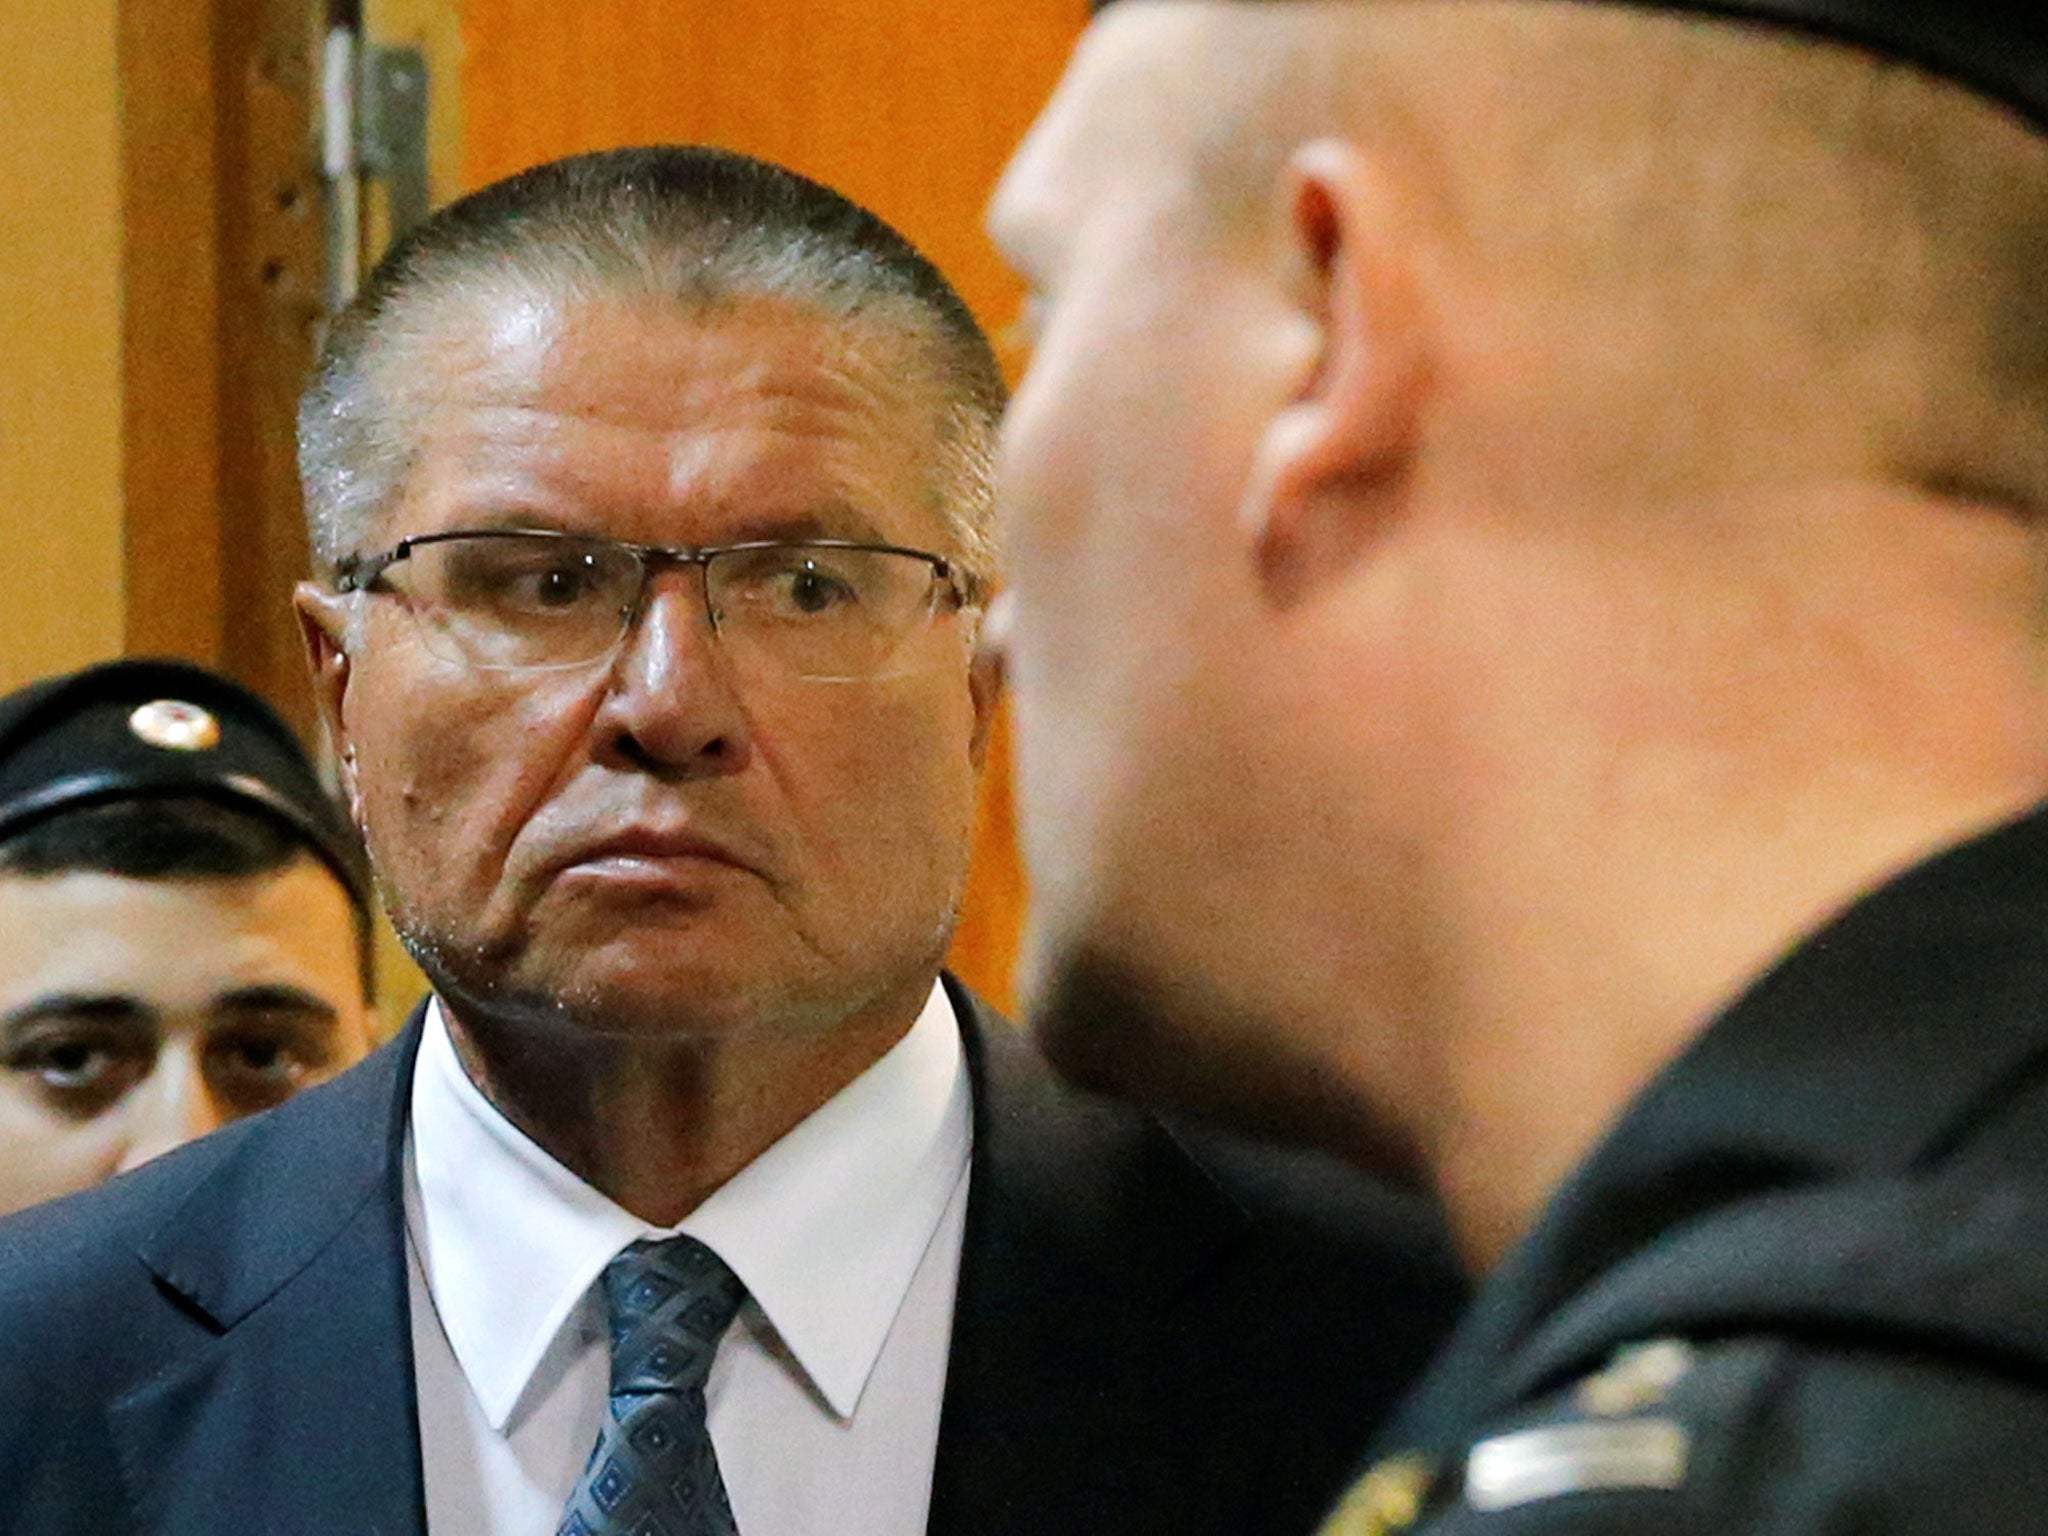 Russian economy minister Alexei Ulyukayev arriving for a hearing at the Basmanny district court in Moscow on 15 November